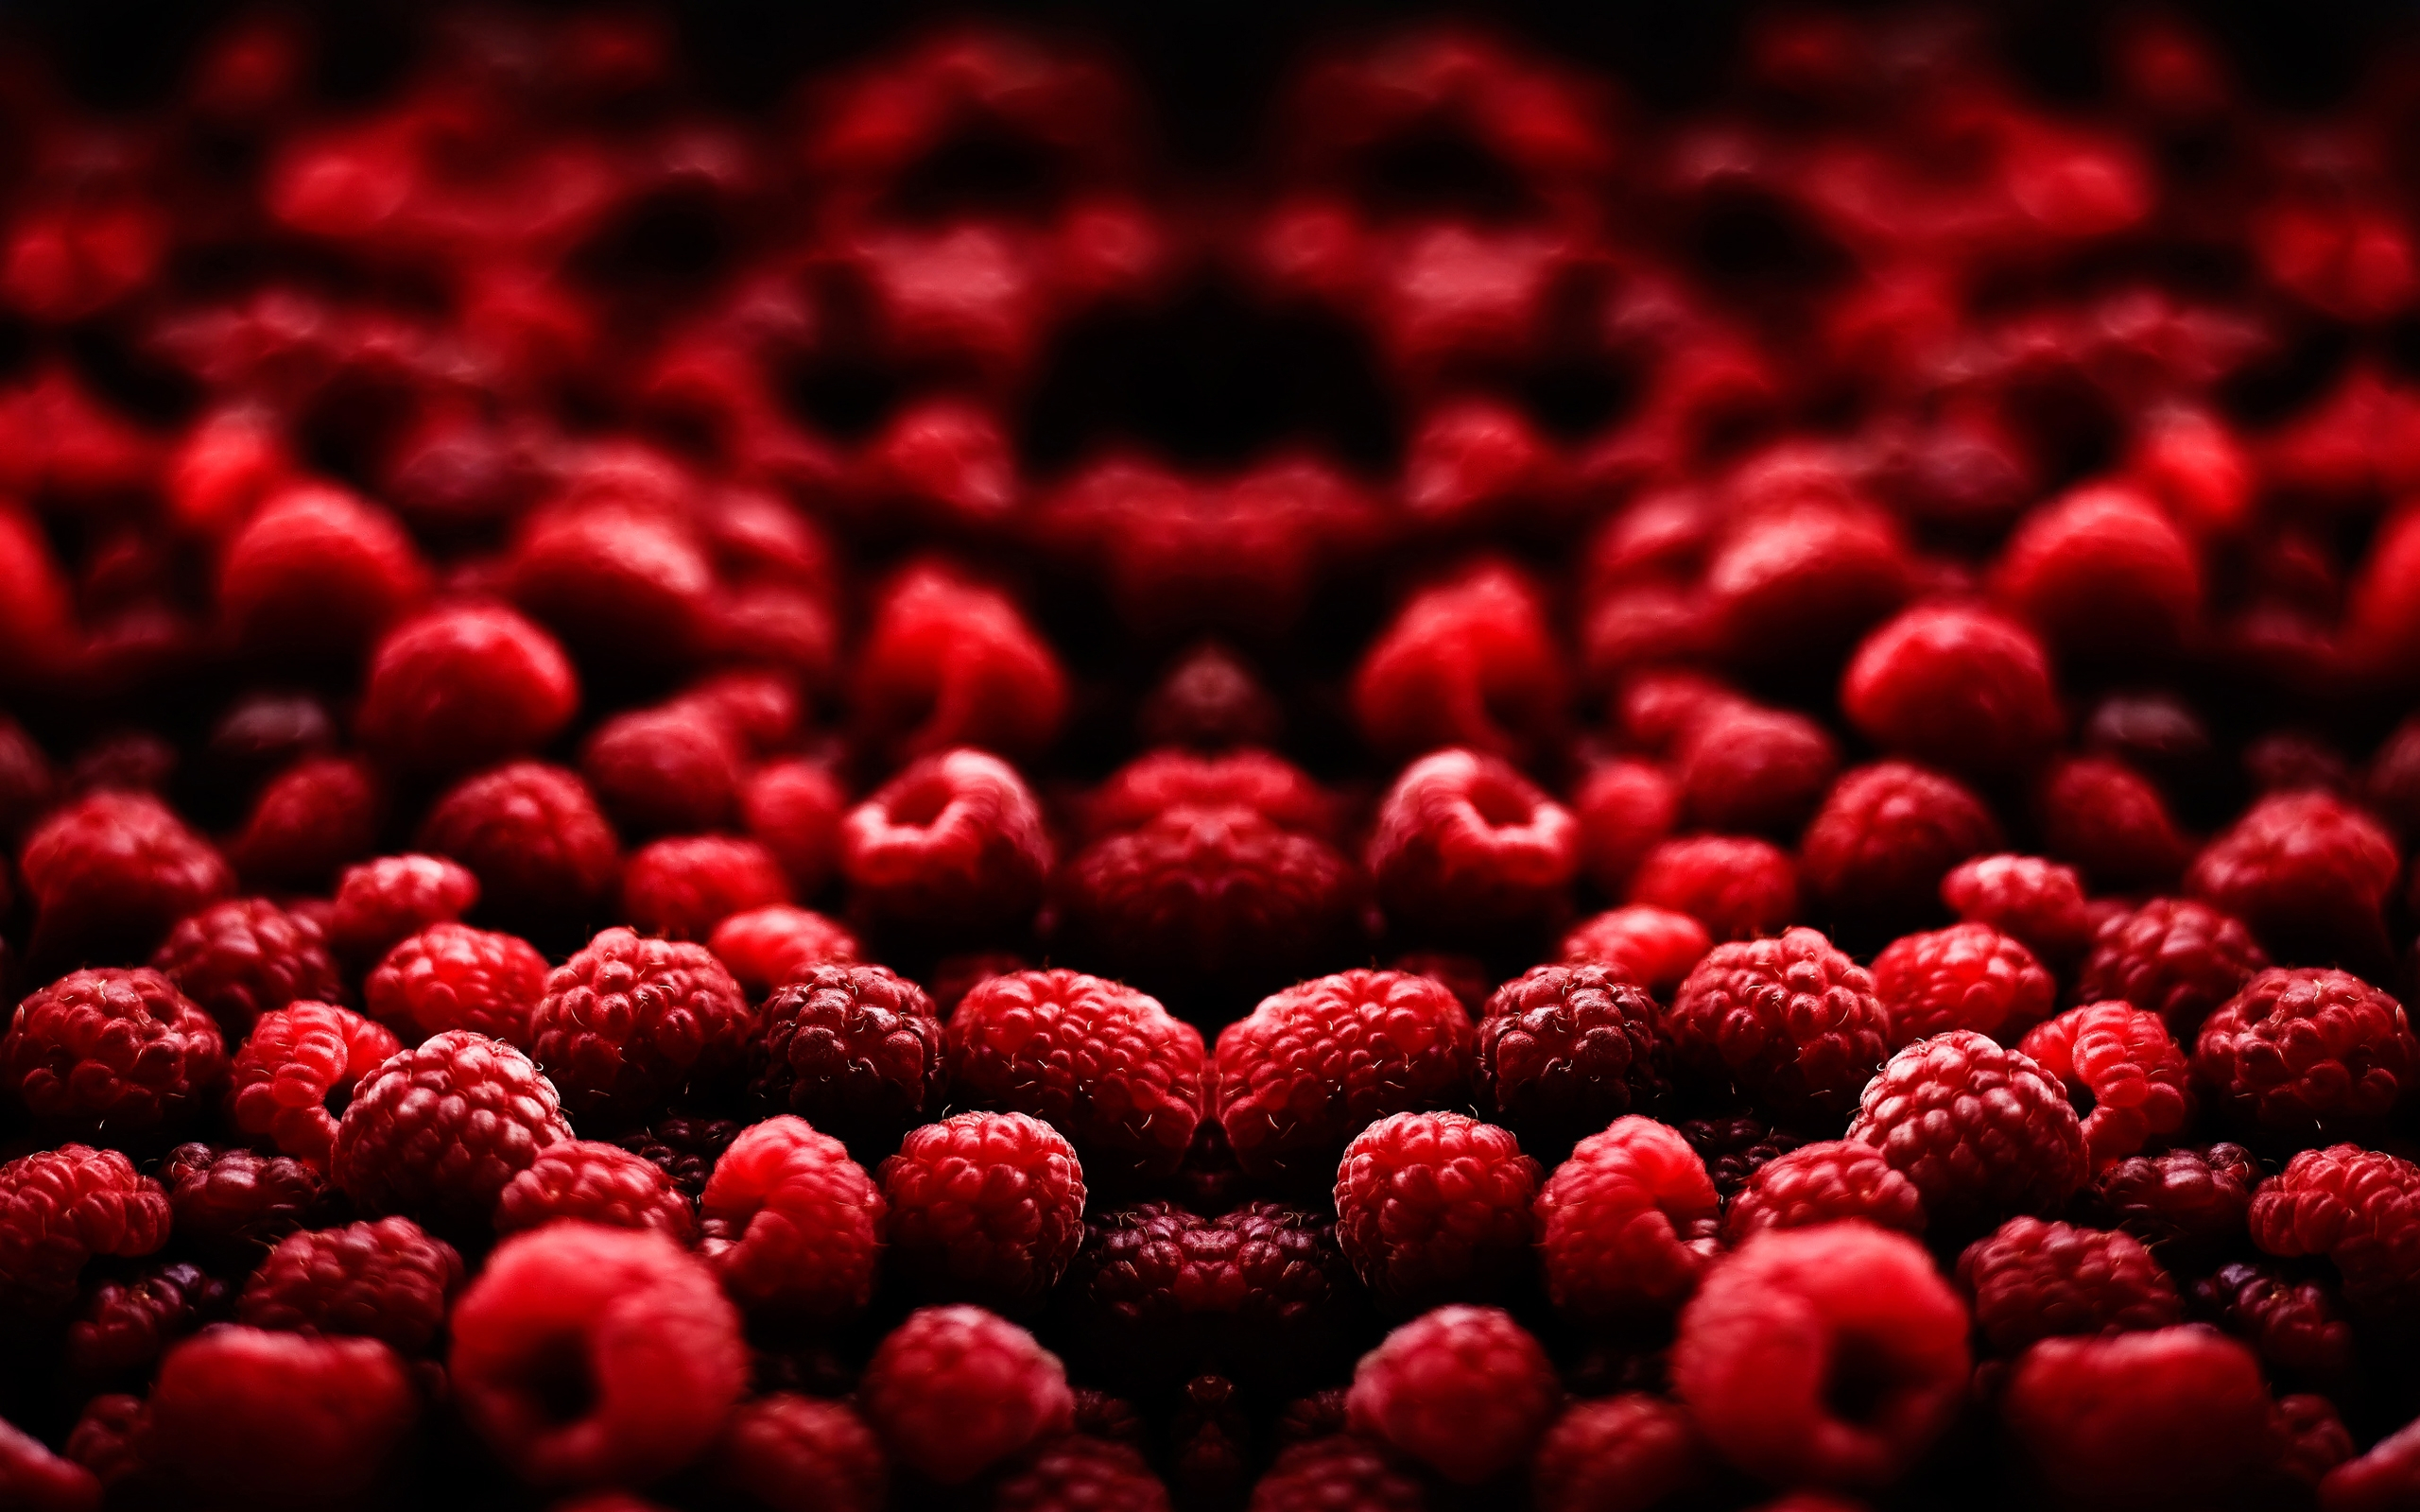 Gorgeous raspberry close-up, perfect for food lovers.